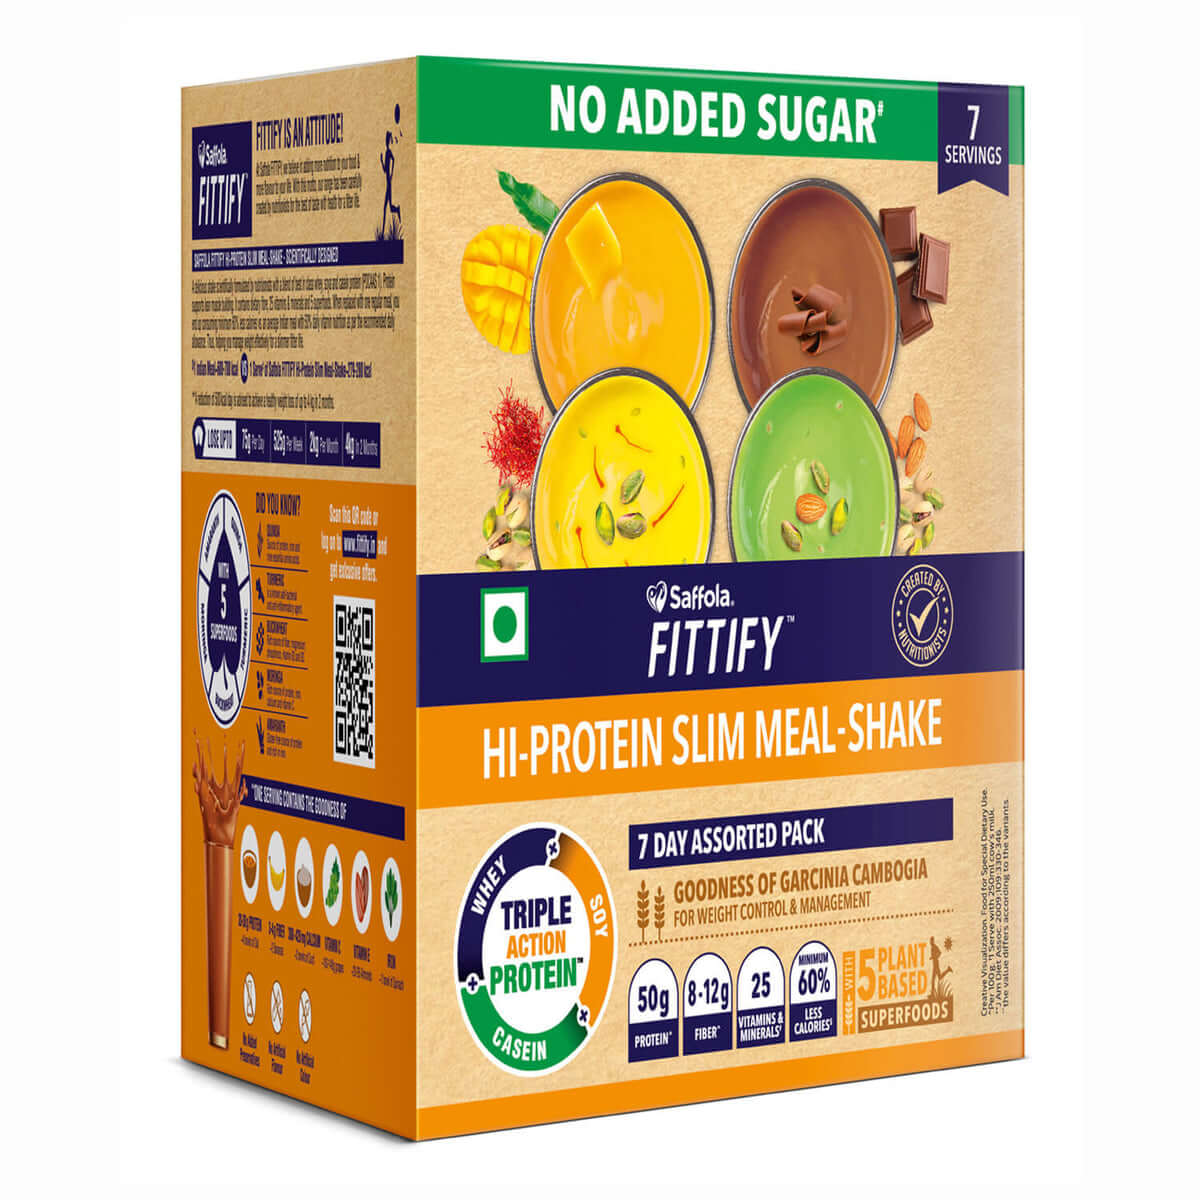 [SALE] Saffola Fittify Hi-Protein Meal Replacement Shake - Assorted Pack